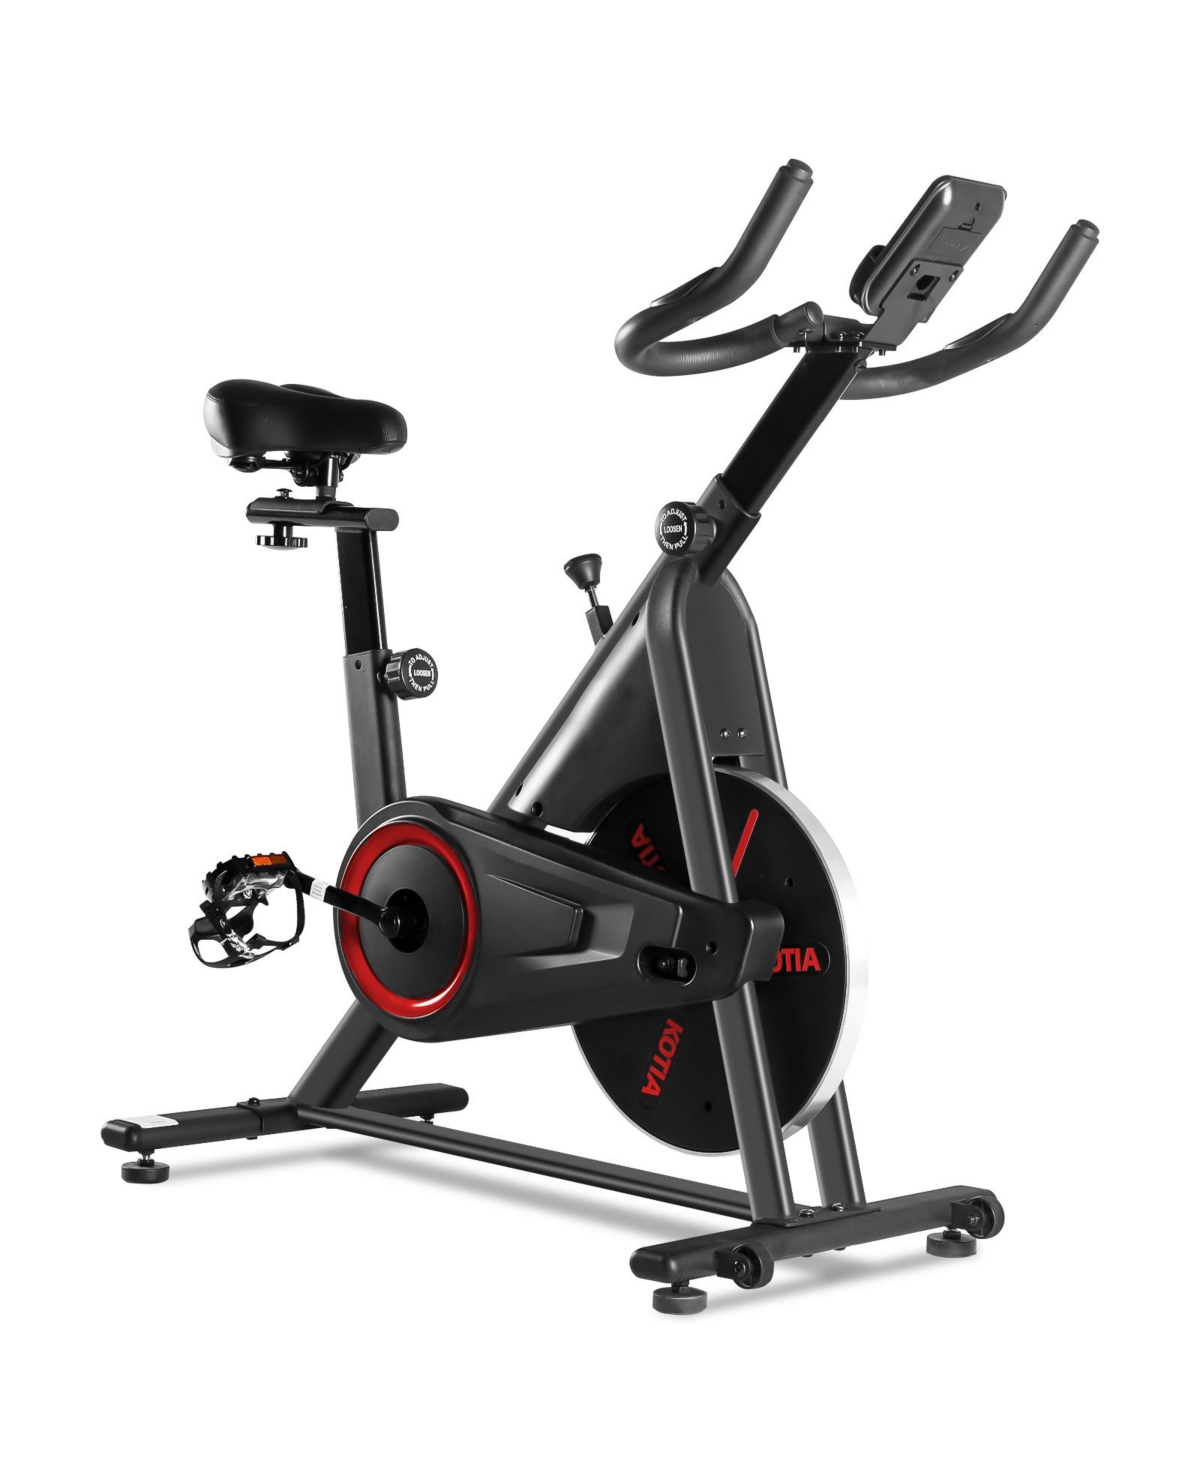 Stationary Bike 4D Adjustment Seat Spin Exercise Bikes With Adjustable Feet 260Lbs Capacity - Black